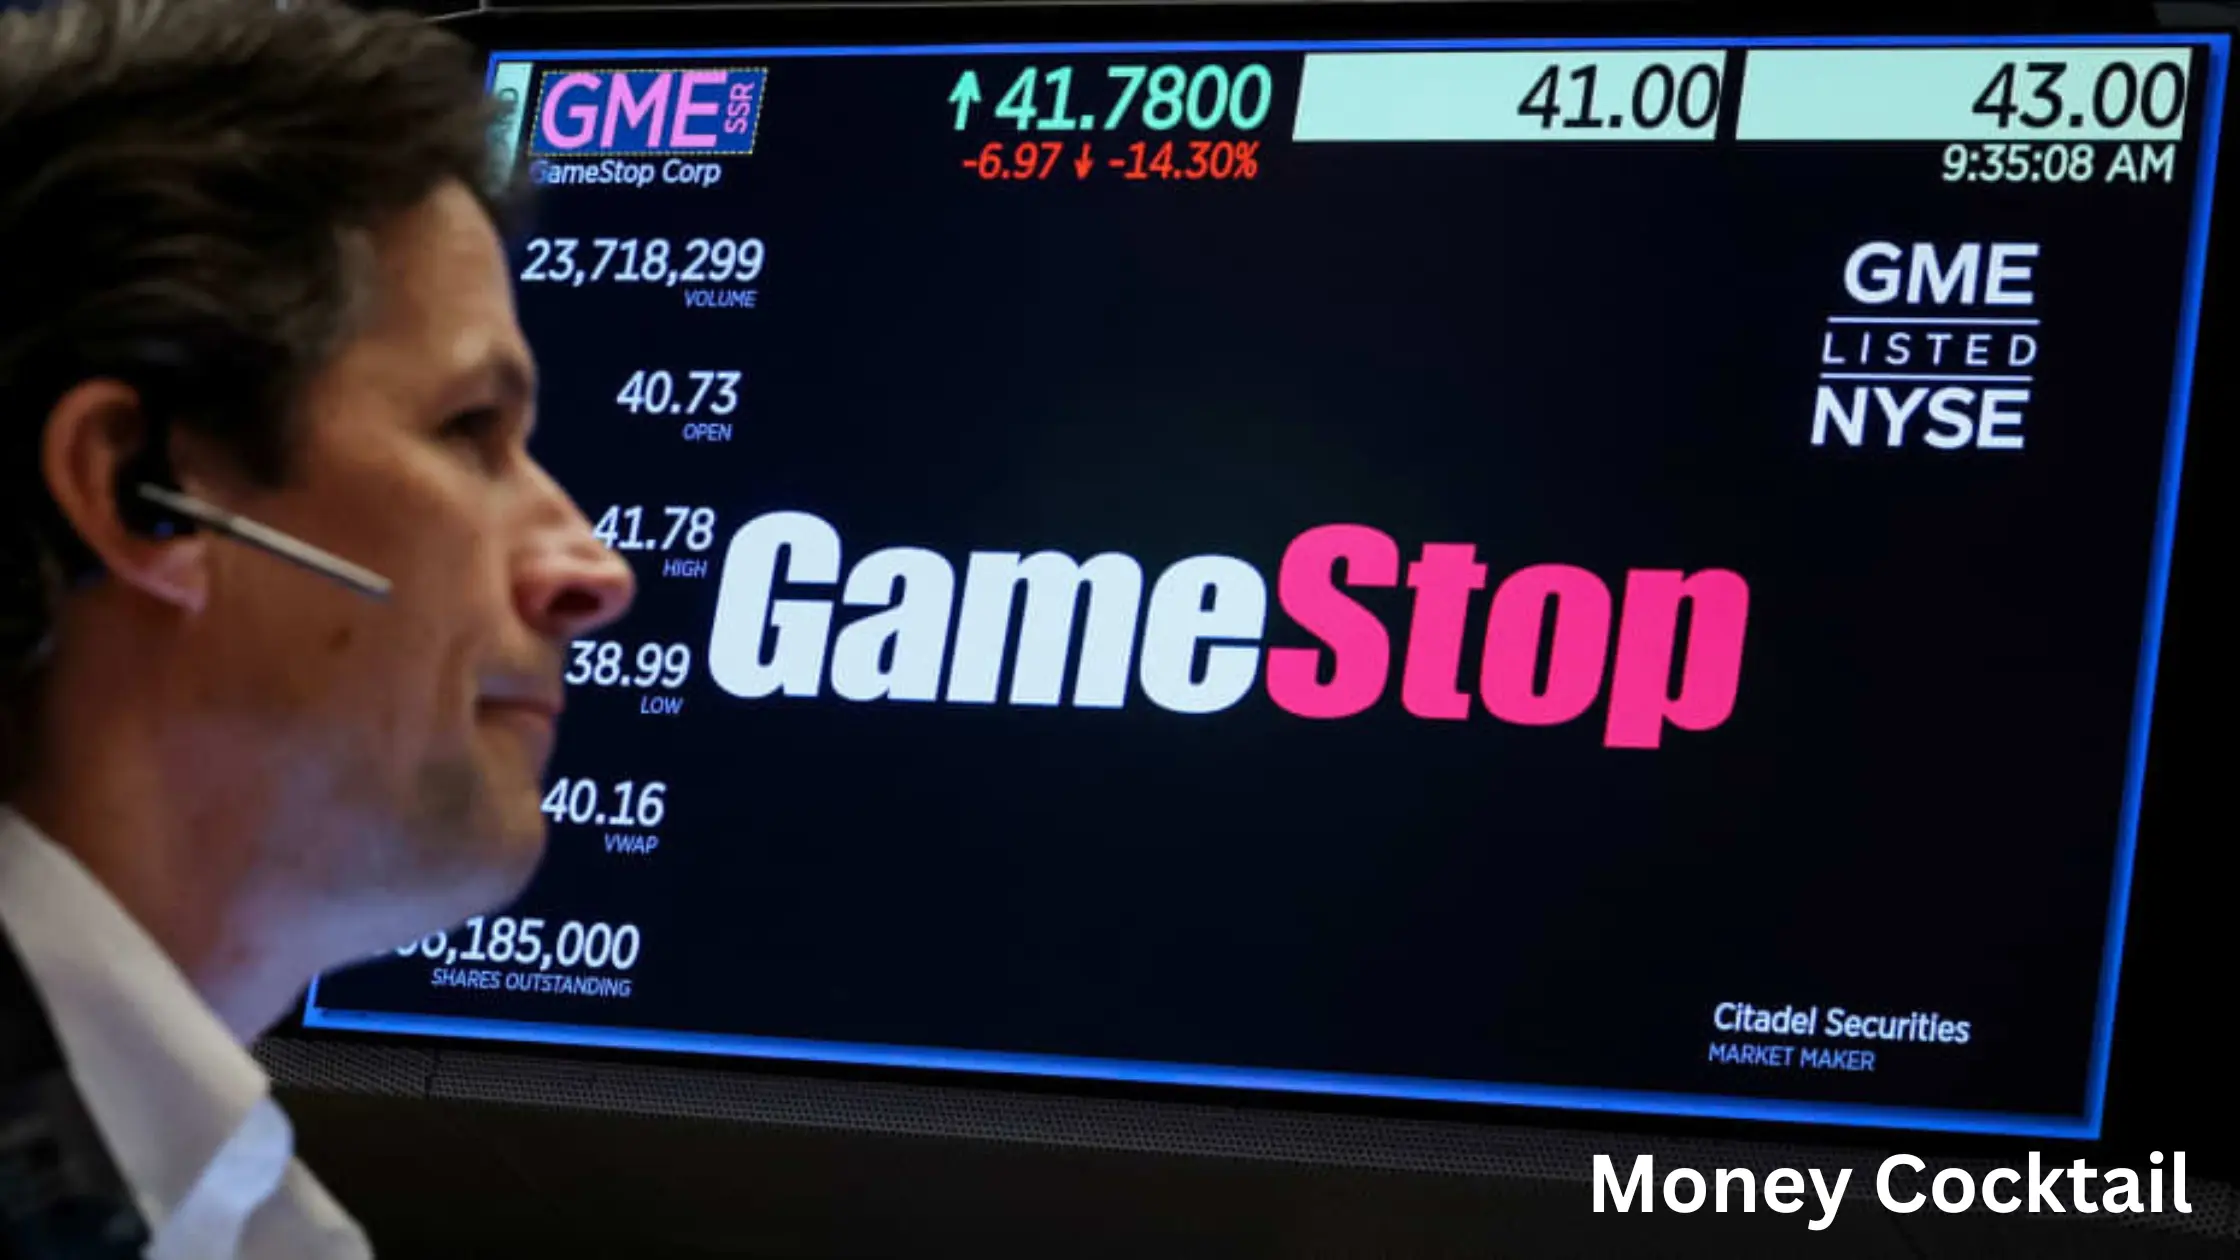 gme after hours stock price